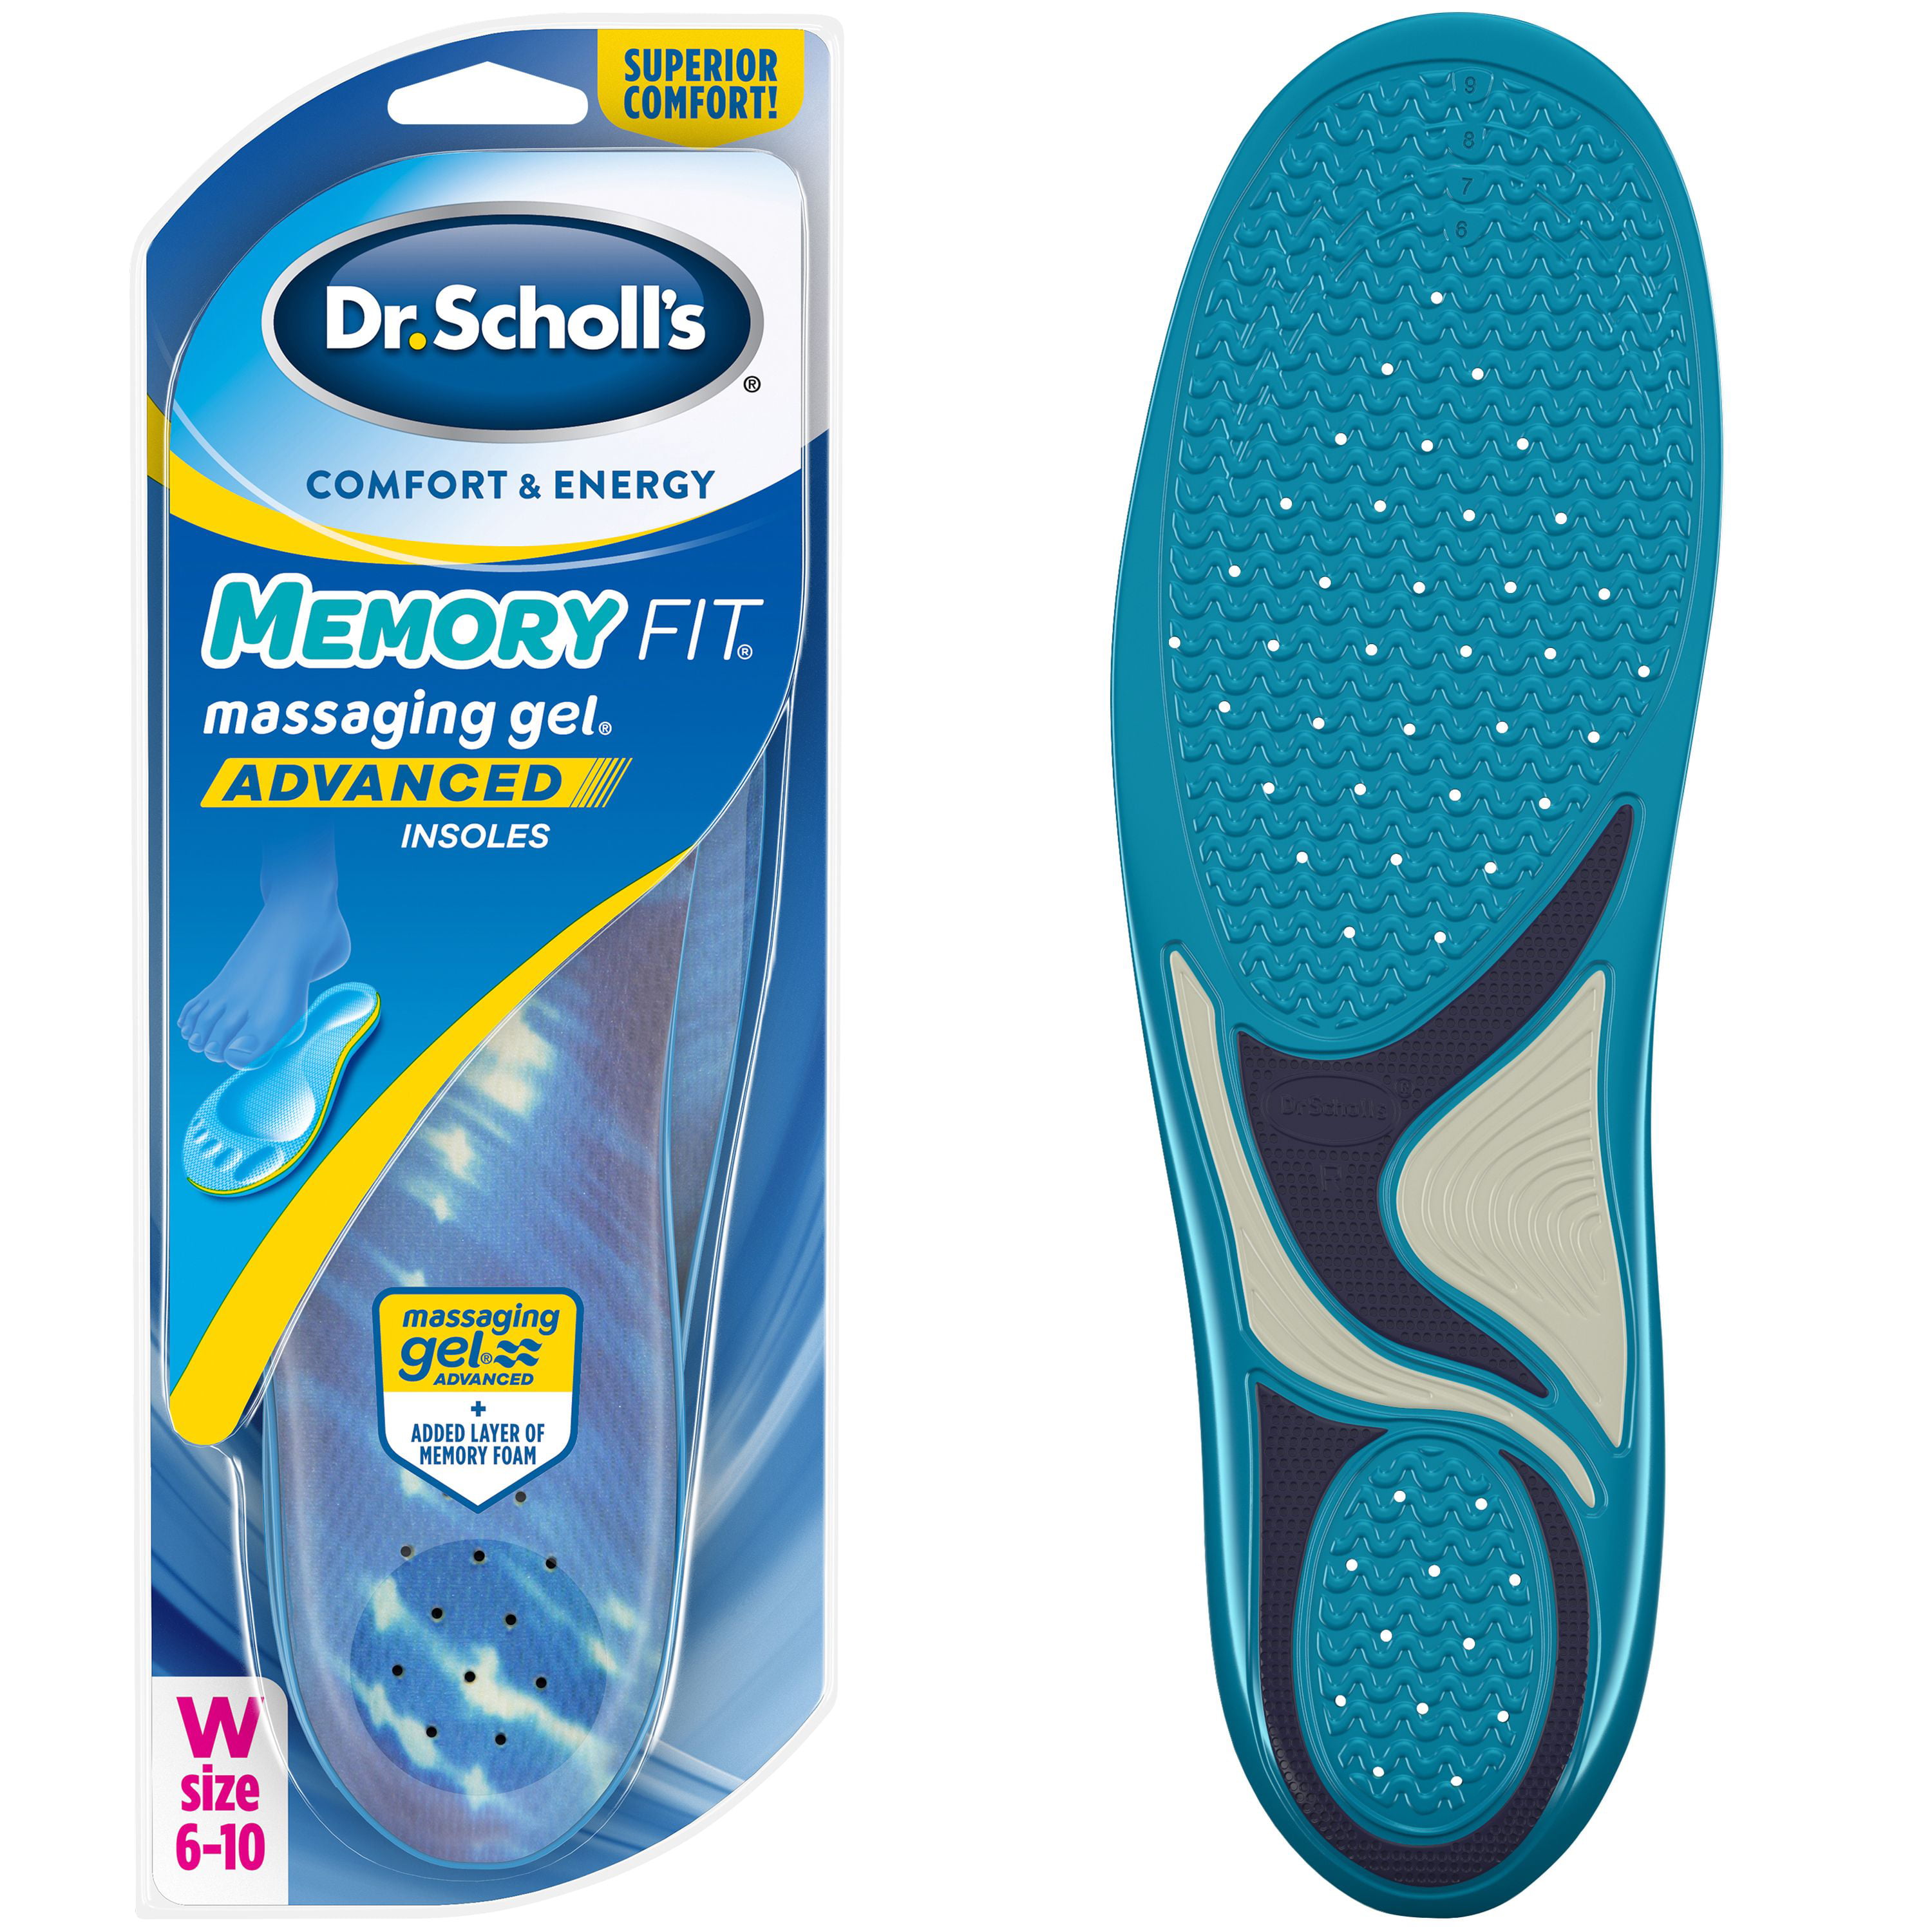 Dr. Scholl's MEMORY FIT Insoles with 